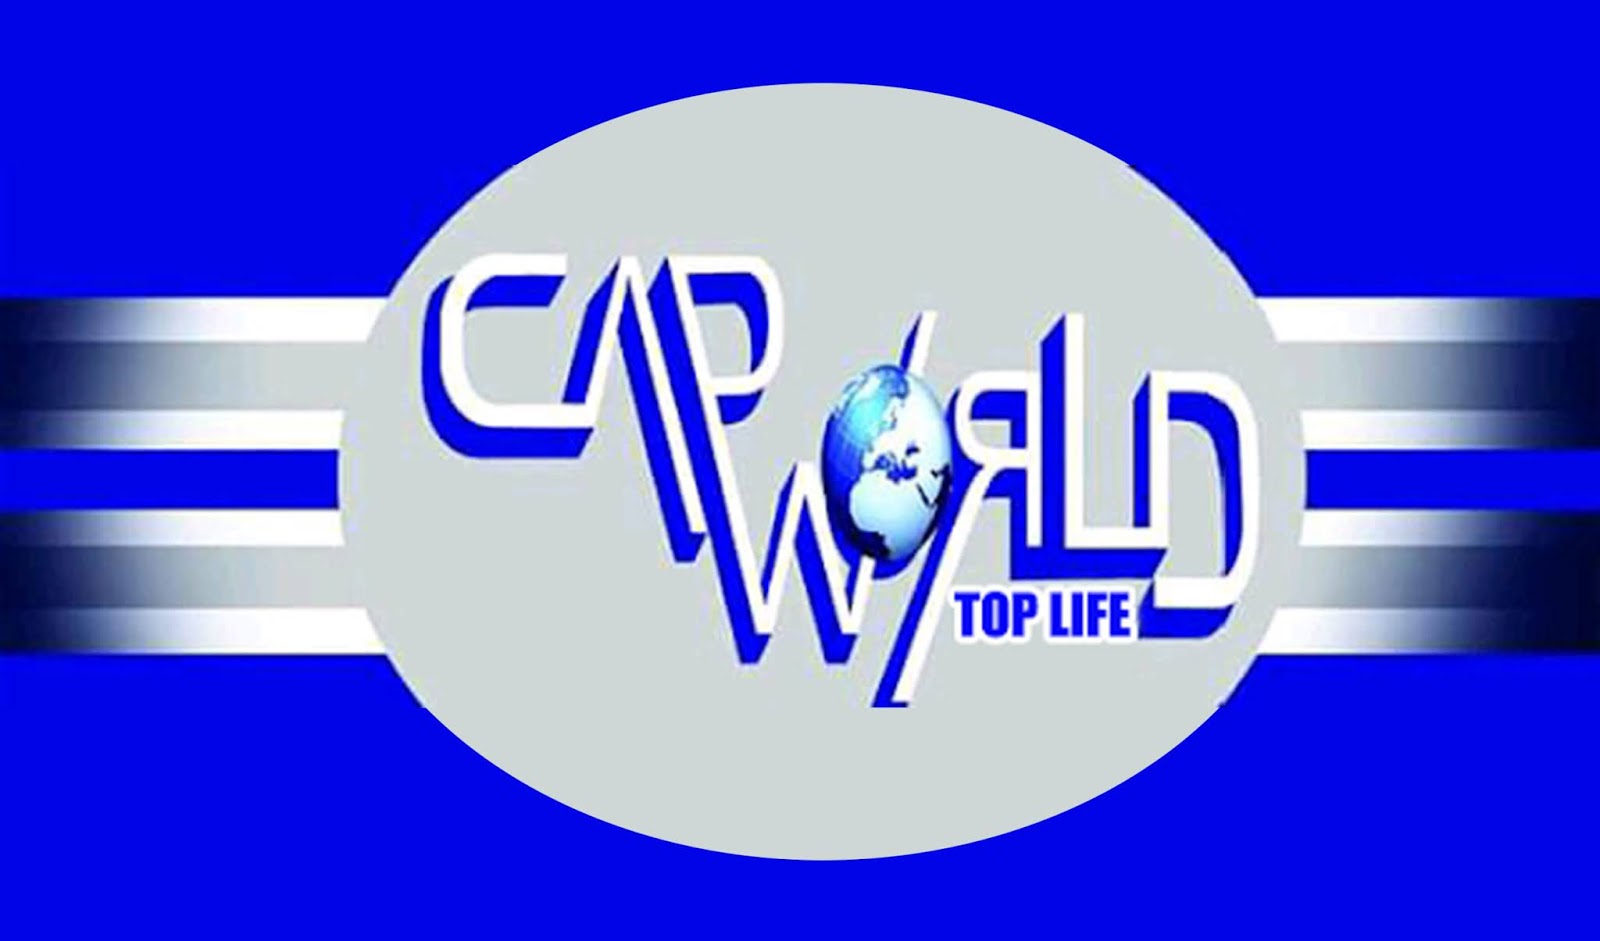 Your Reliable Business Solutions Partner | CAP WORLD Top Life | From Los Angeles, CA To The World